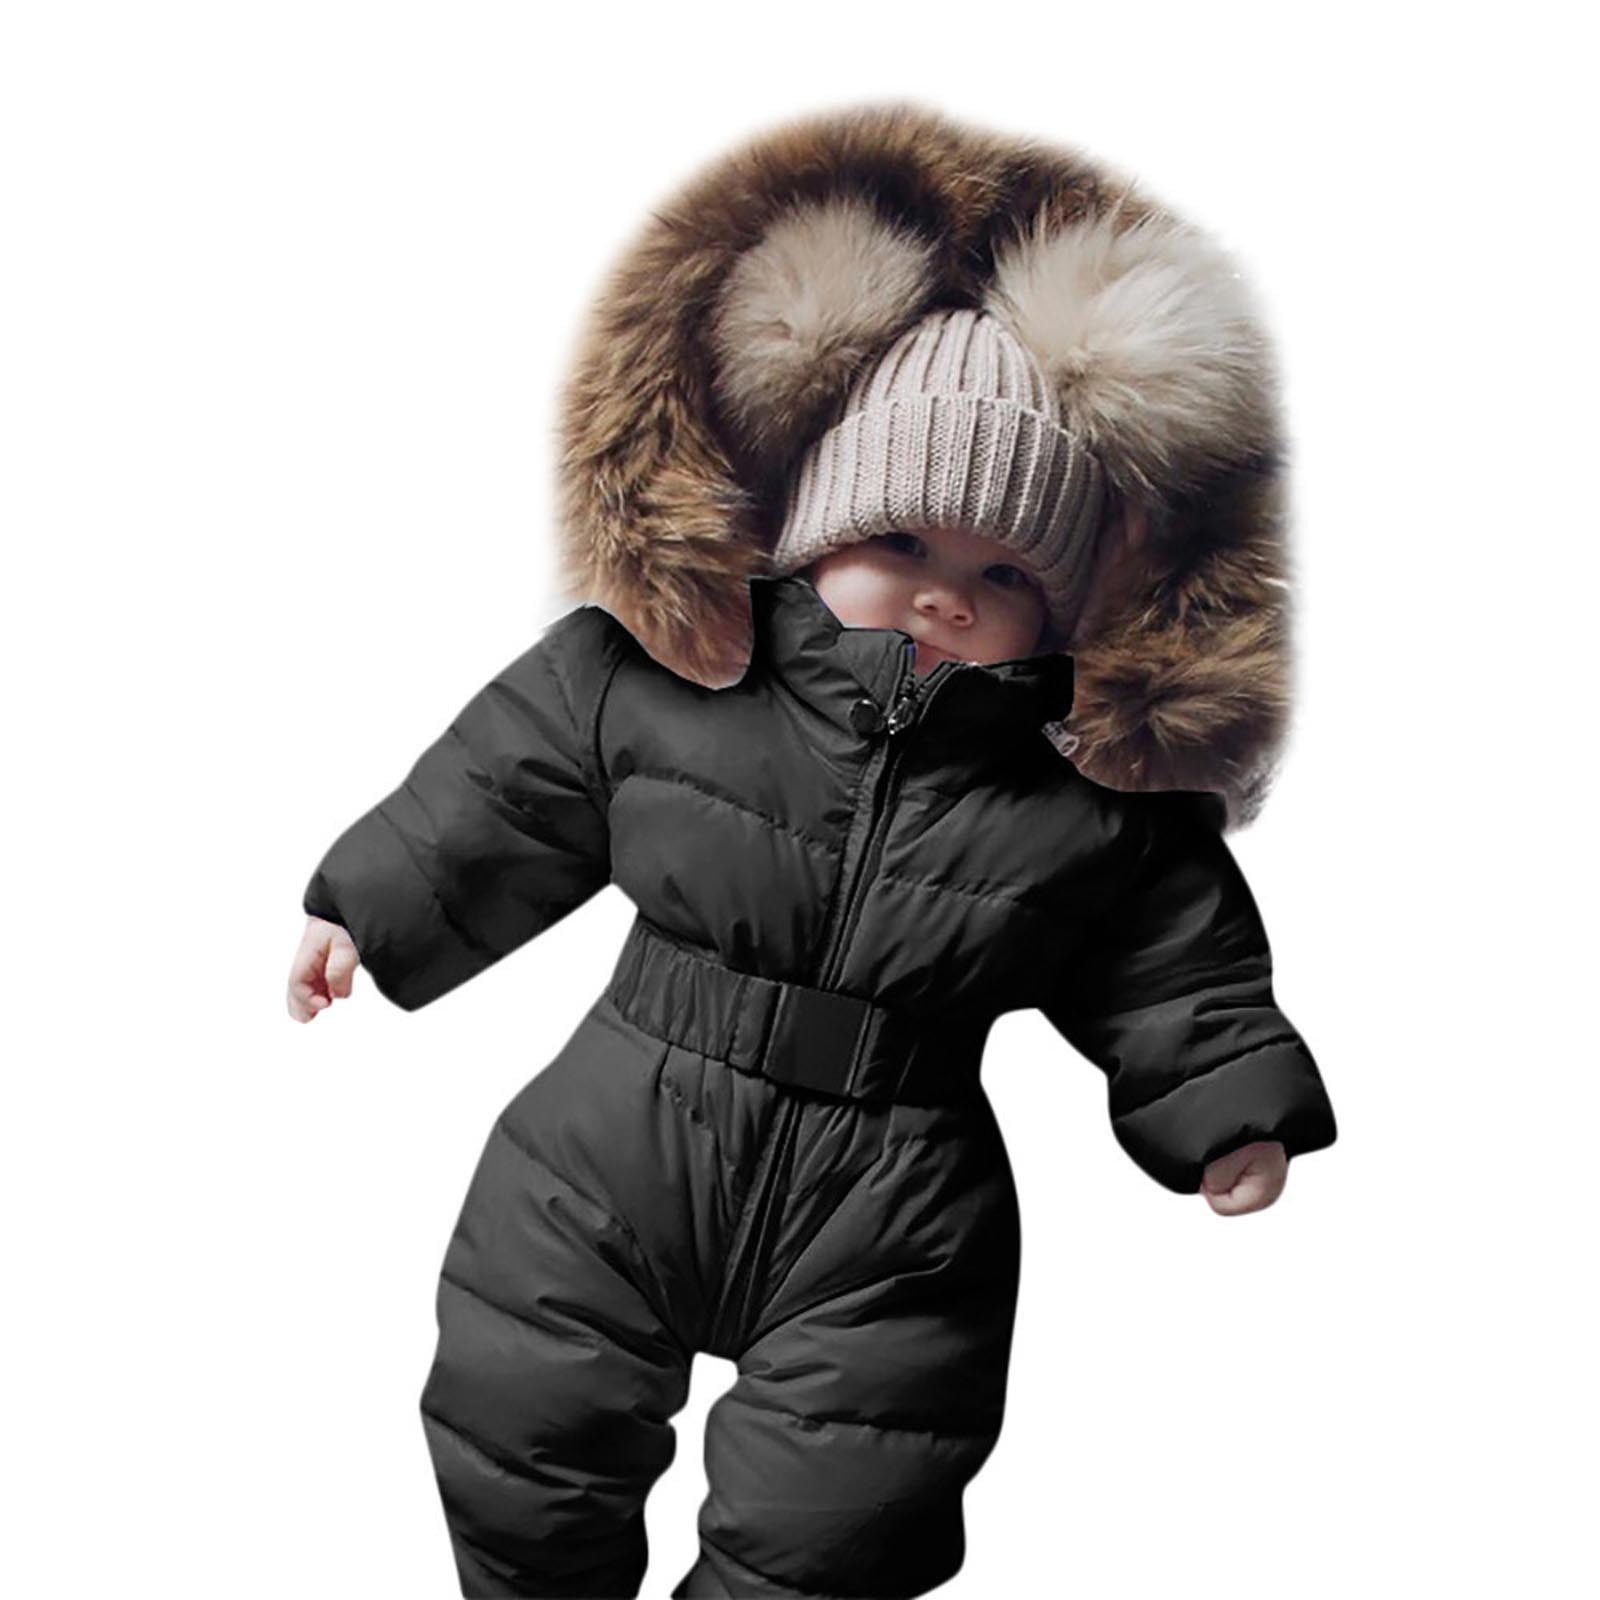 Toddler Infant Baby Boys Girls outerwear Hooded Winter Warm Jacket Down Snowsuit 